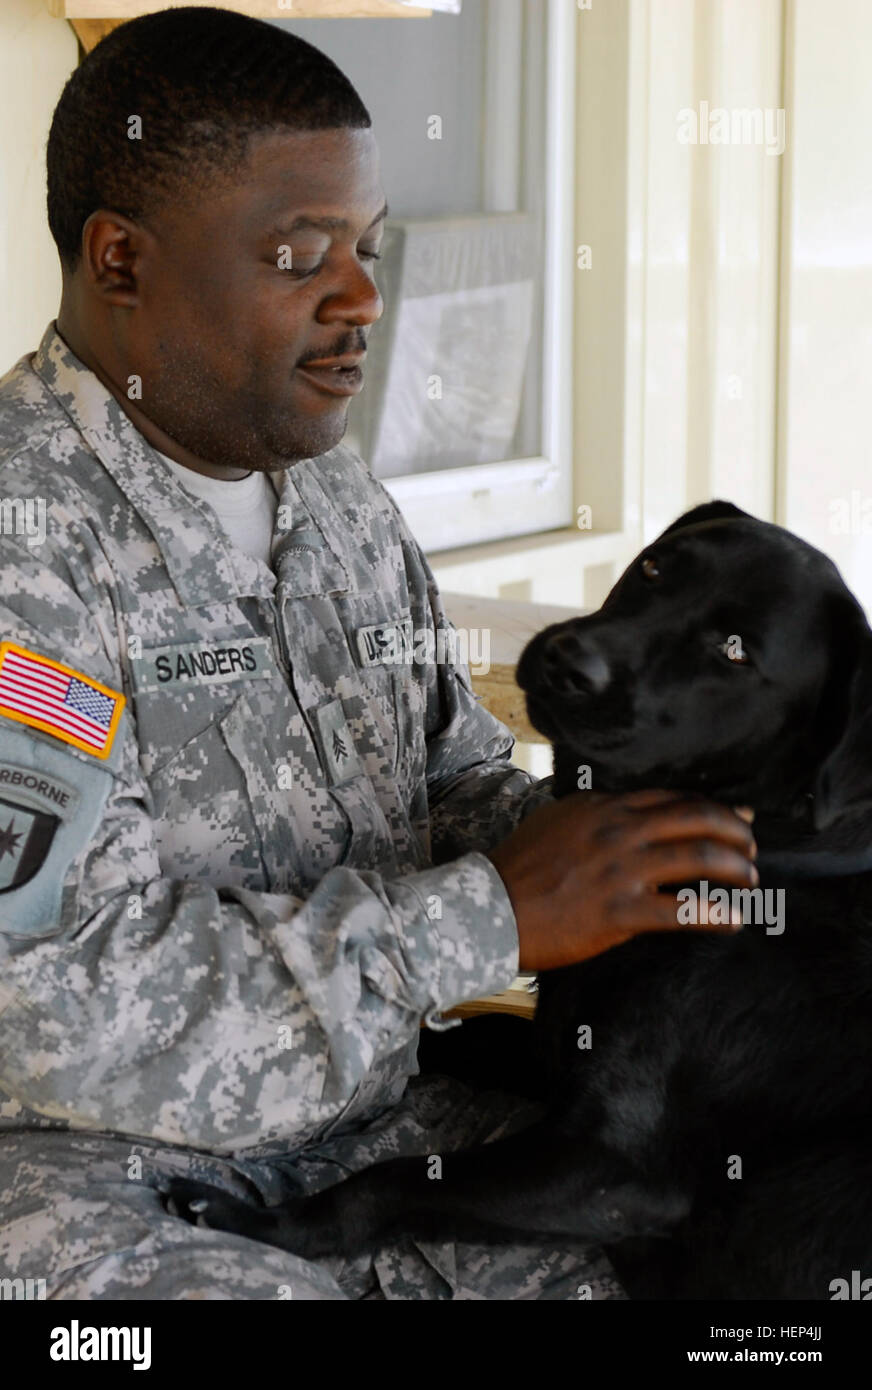 Philadelphia native Sgt. Duane Sanders, an occupational therapist with 528th Medical Detachment out of Fort Bragg, N.C., looks down at his buddy, Sgt 1st Class Budge, an animal assisted therapy dog in Mosul, Iraq. Sanders and Budge have made it a habit to visit a different unit on Forward Operating Bases Marez and Diamondback every morning so that Soldiers in that unit get a chance to meet and play with Budge. (U.S Army photo by Spc. Karla P RodriguezMaciel, 11th Public Affairs Detachment) Budge, stress reliever, dog in disguise 100540 Stock Photo